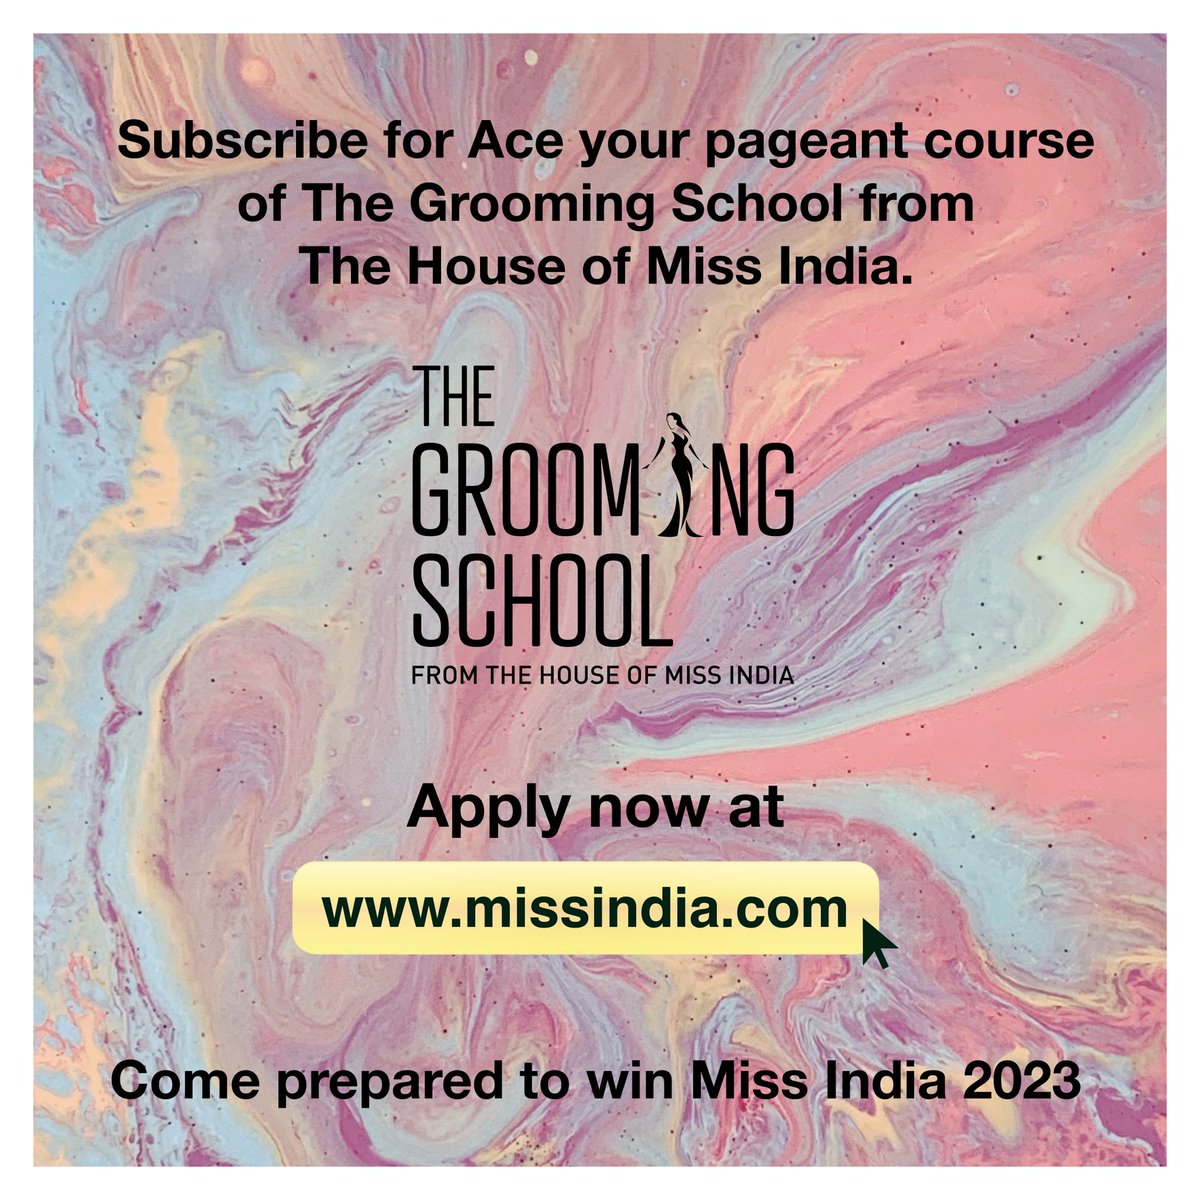 The Grooming School by House of Miss India's 'Ace Your Pageant' course is your one-stop destination to get Femina Miss India 2023 ready. Subscribe to The Grooming School today and apply now at 
missindia.com ✨

@TGSbyMissIndia 

#FeminaMissIndia2023 #TheGroomingSchool